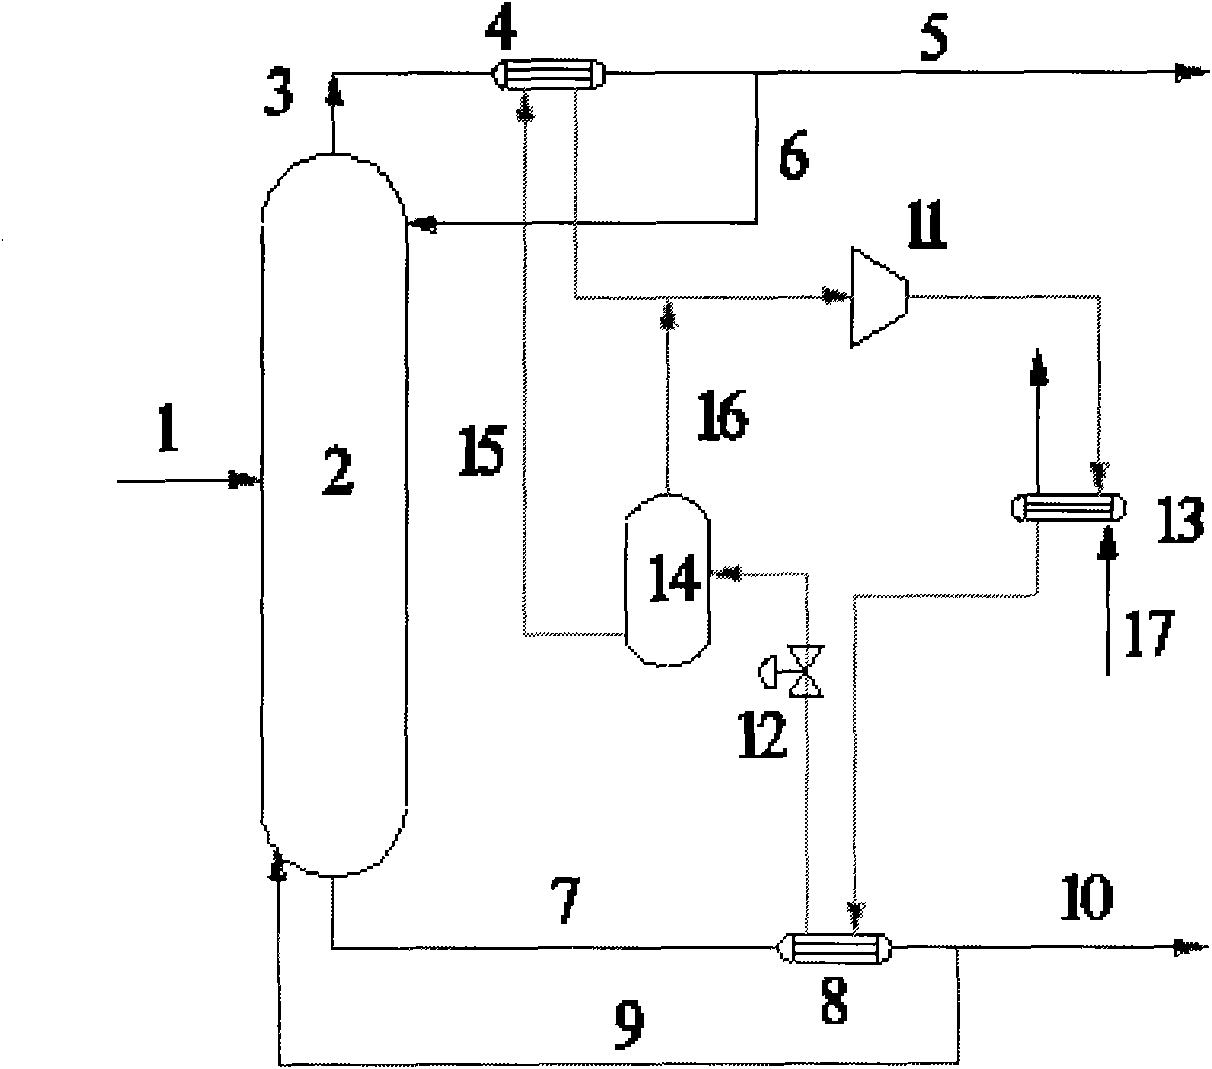 Method for separating acetic acid from water by rectification of acetic acid dehydrating tower